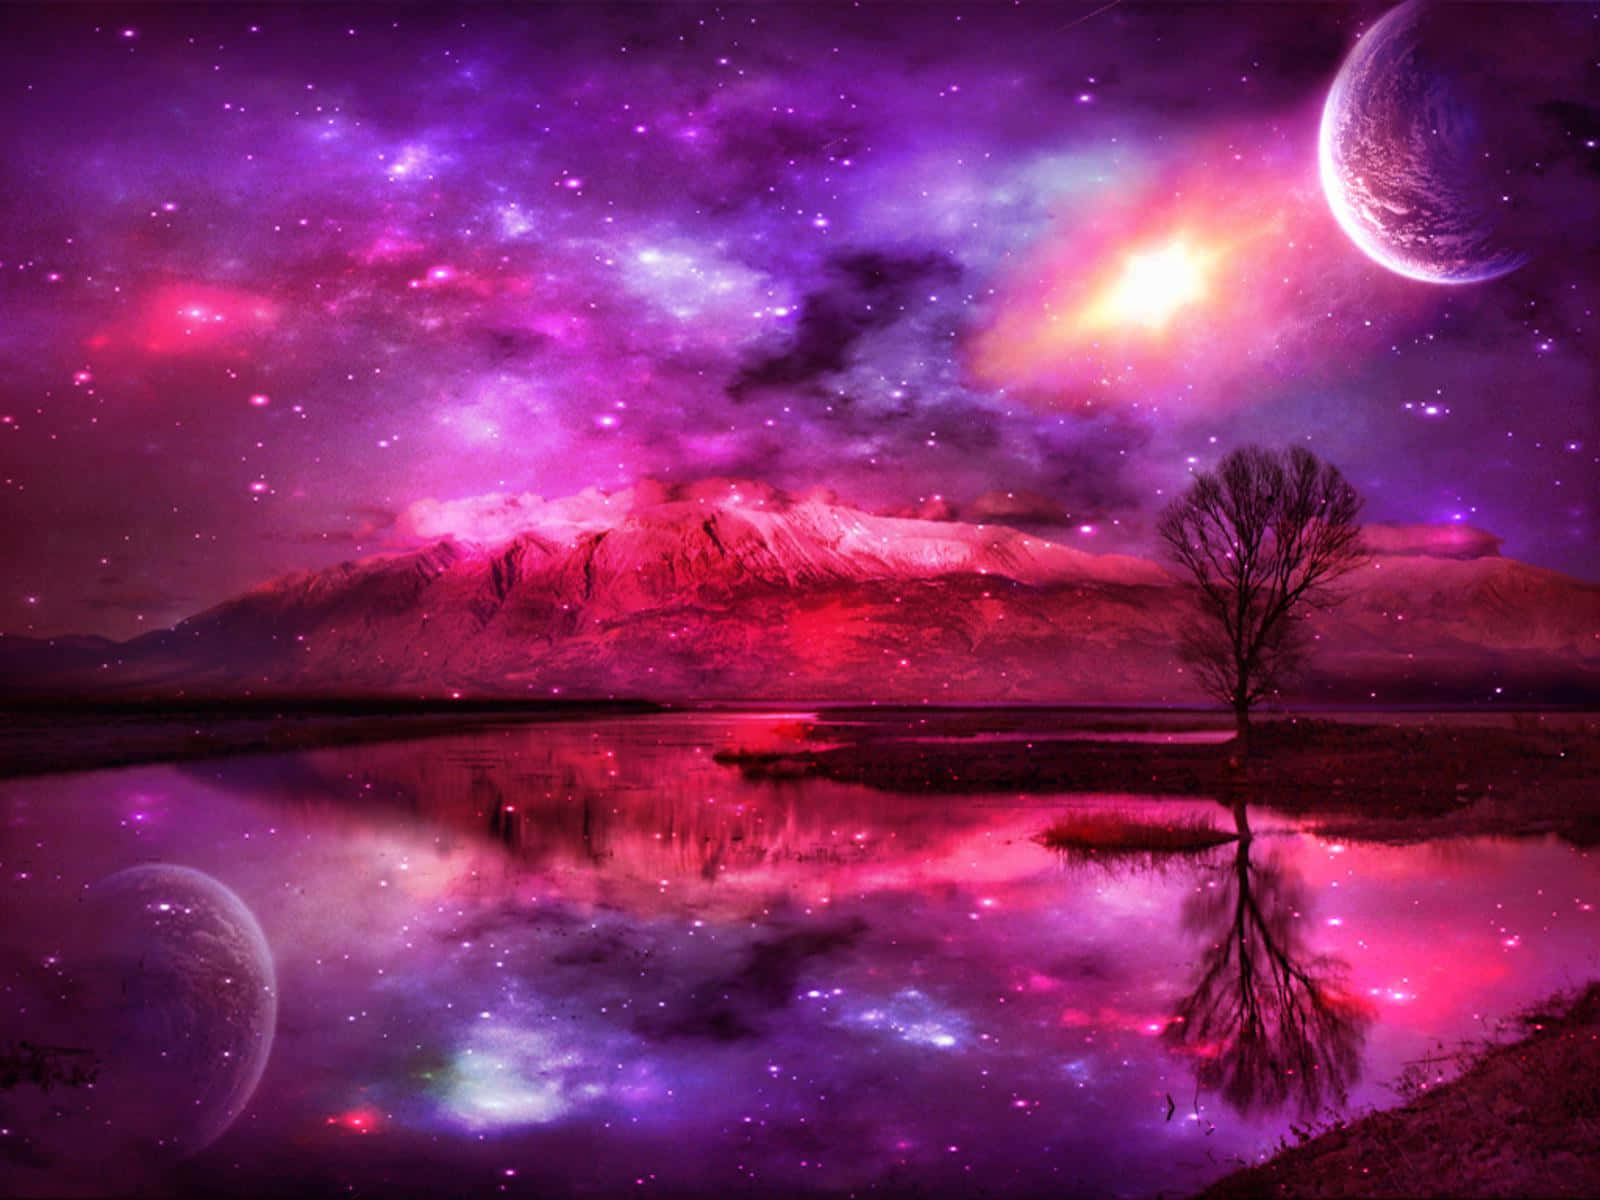 A Purple And Pink Galaxy With A Tree And A Lake Wallpaper